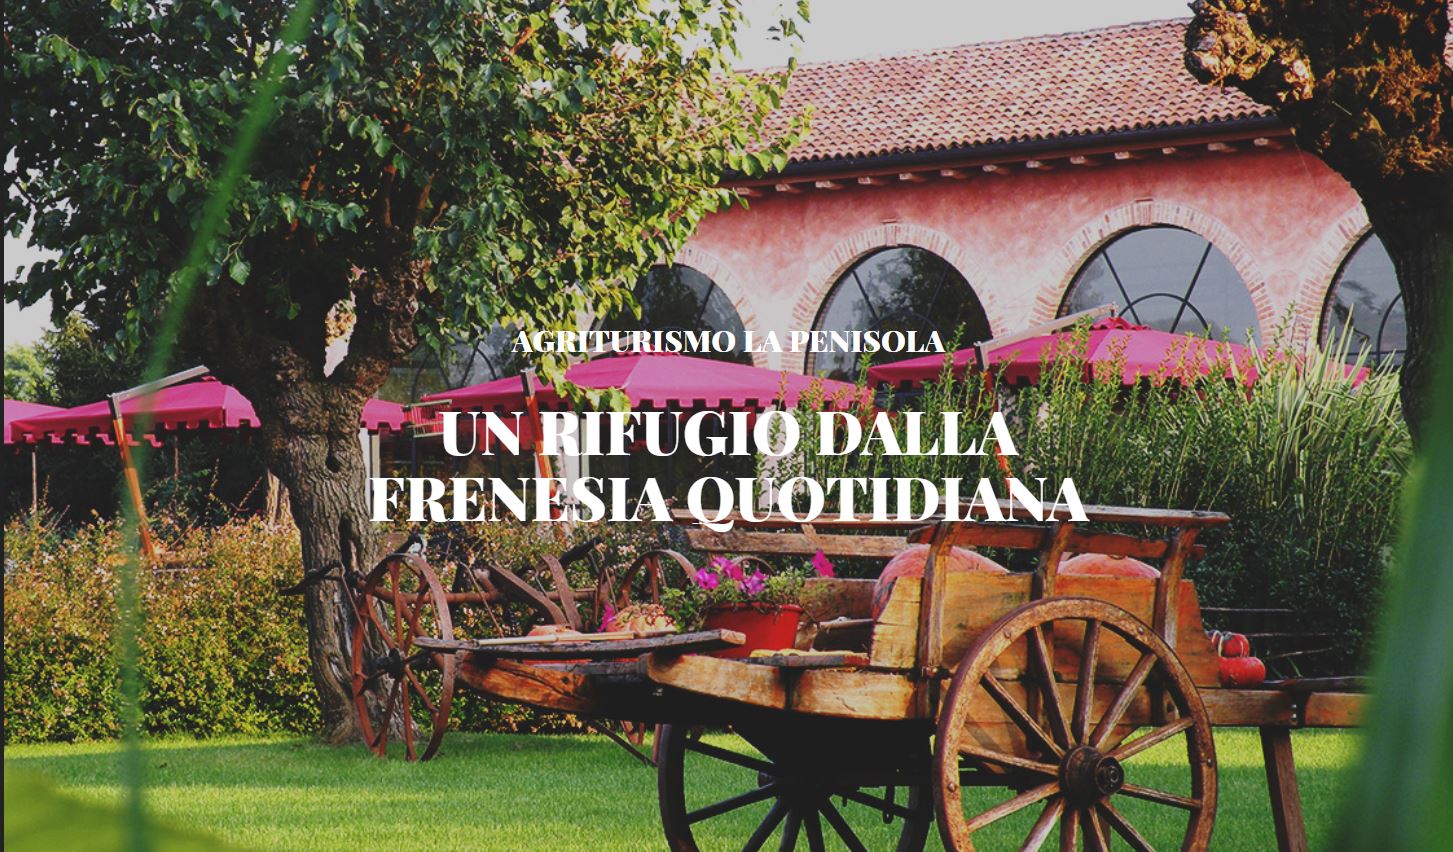 AGRITURISMO LA PENISOLA  Was founded in the winter of 2005 at the coronation of a dream: to enhance, promote and  enrich the culture of the farming world. In a bend of the River Brenta you can find this restored  farmhouse with great skill that reflects the criteria of the great fathers of yore.